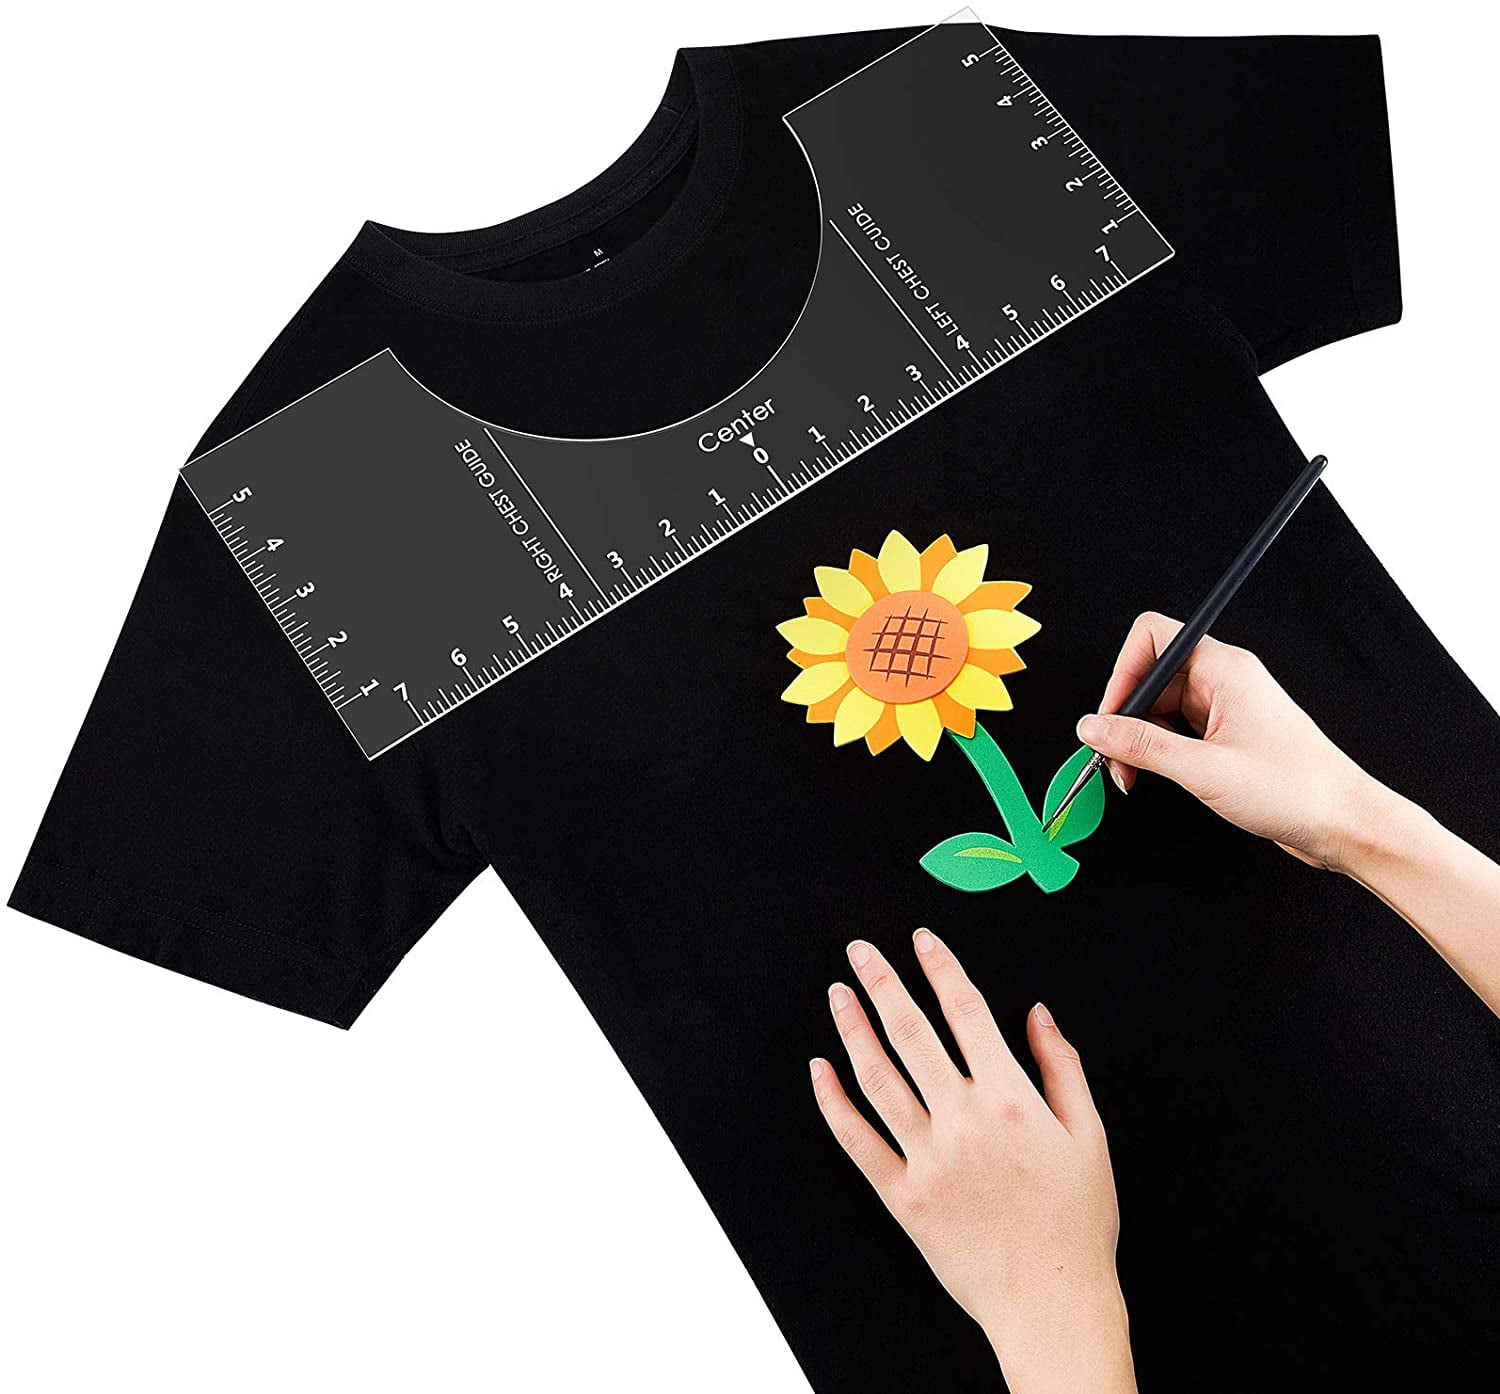 1 T-Shirt Alignment Tool T-Shirt Ruler Guide T-Shirt Centering Printing Alignment Vinyl Guide T-Shirt Making Measuring Tool for Fabric Cutting Quilting Sewing Crafts 